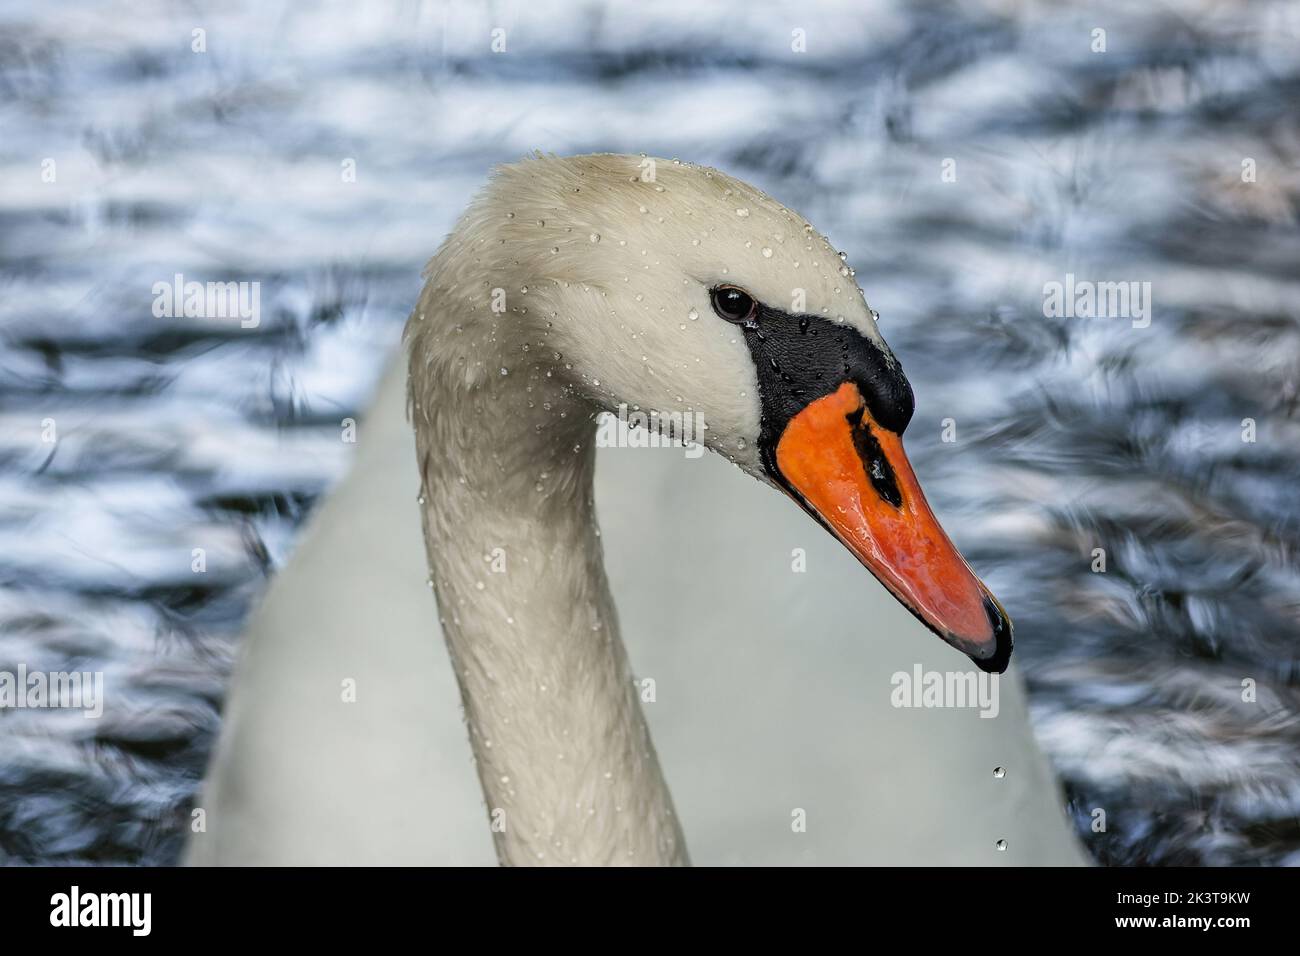 Close up portrait of a white mute swan with an orange beak and wet drops on the feathers. Blue rippled water in the background. Stock Photo